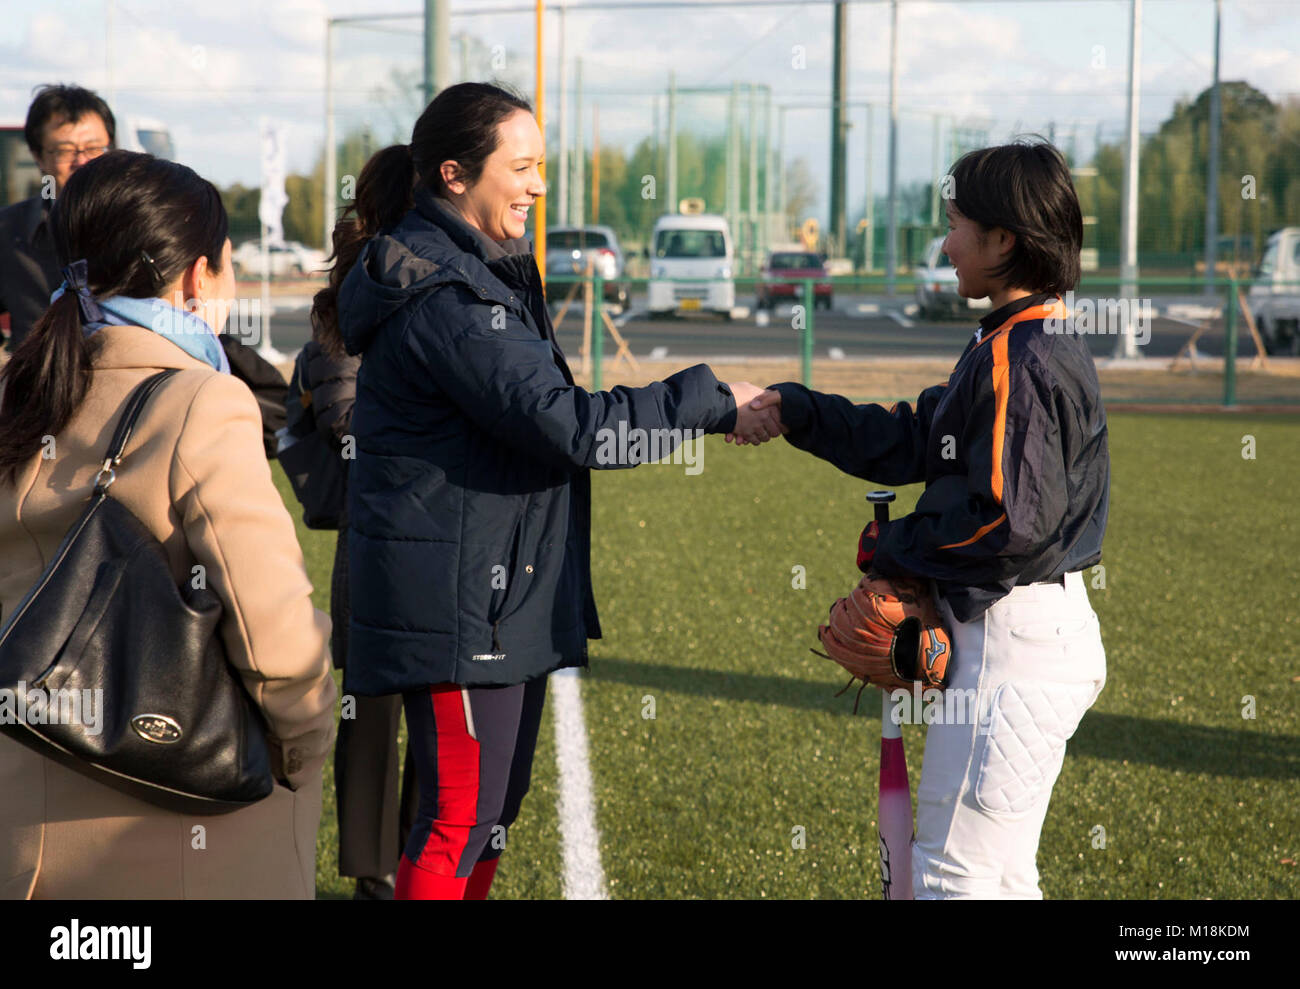 Valerie Arioto, an infielder with the U.S.A. National Women’s Softball team, greets a teenager from the Higashi Middle School softball team at the new Kizuna stadium in Iwakuni City, Japan, Jan. 25, 2018. The U.S. National Women’s Softball team visited players from middle and elementary schools to practice together. The intent of the U.S.A softball team’s visit was to determine if the stadium is suitable for the team to practice and play future games at. The stadium is a hallmark of what the U.S.-Japan friendship has accomplished in Iwakuni City. Everything from the dogwood trees planted just  Stock Photo